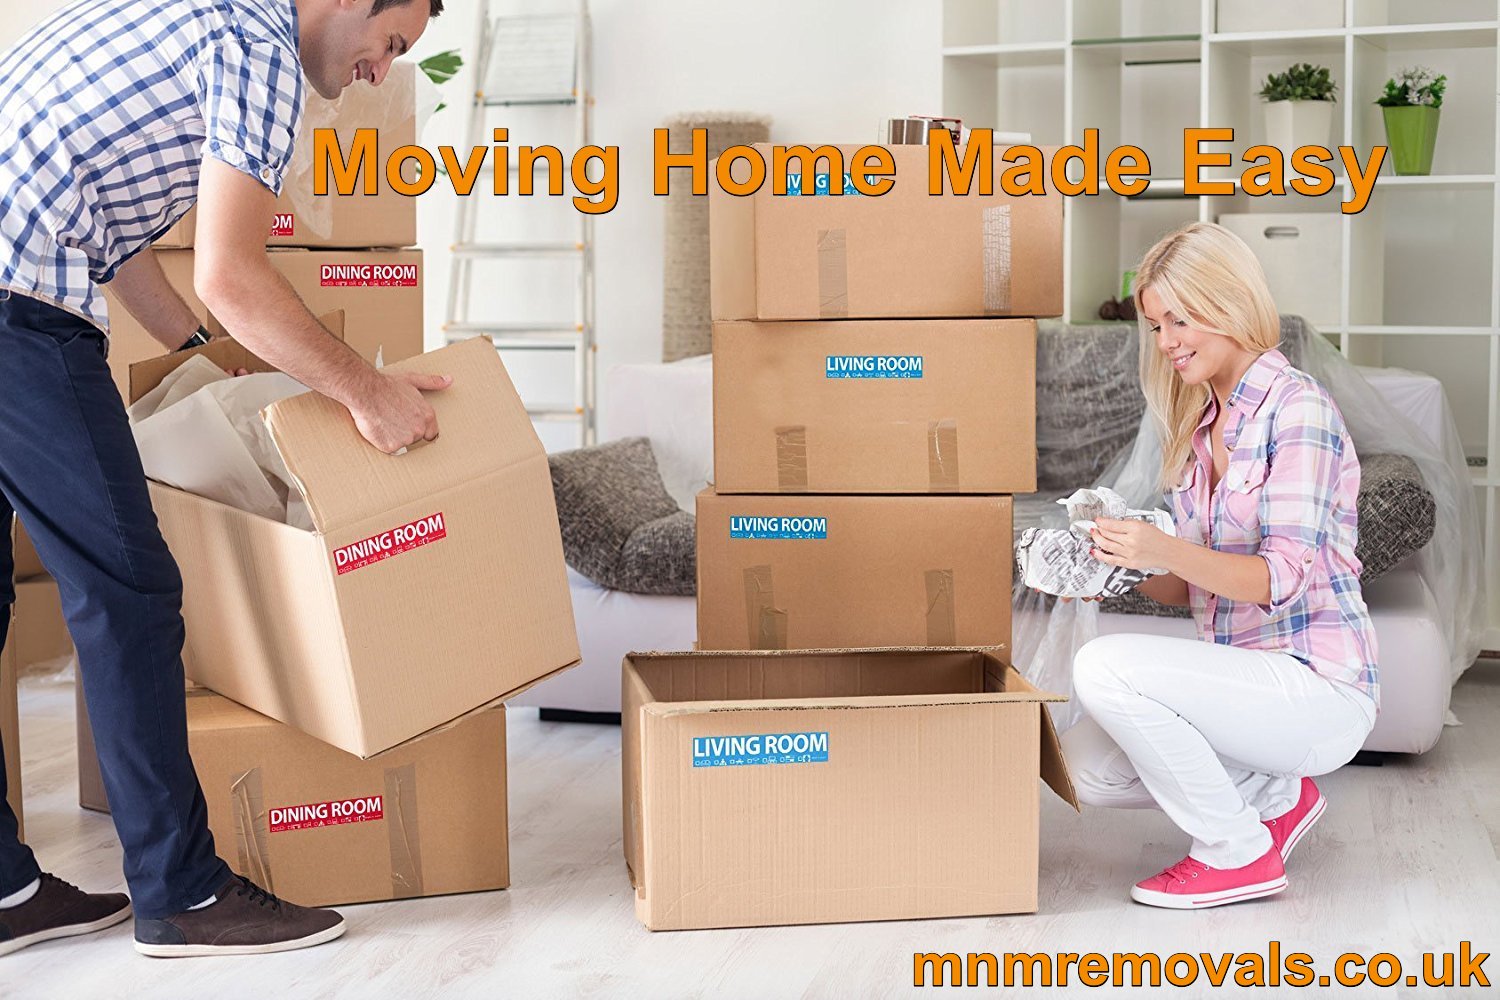 Home & Piano removals in Ashbourne Belper & Ripley